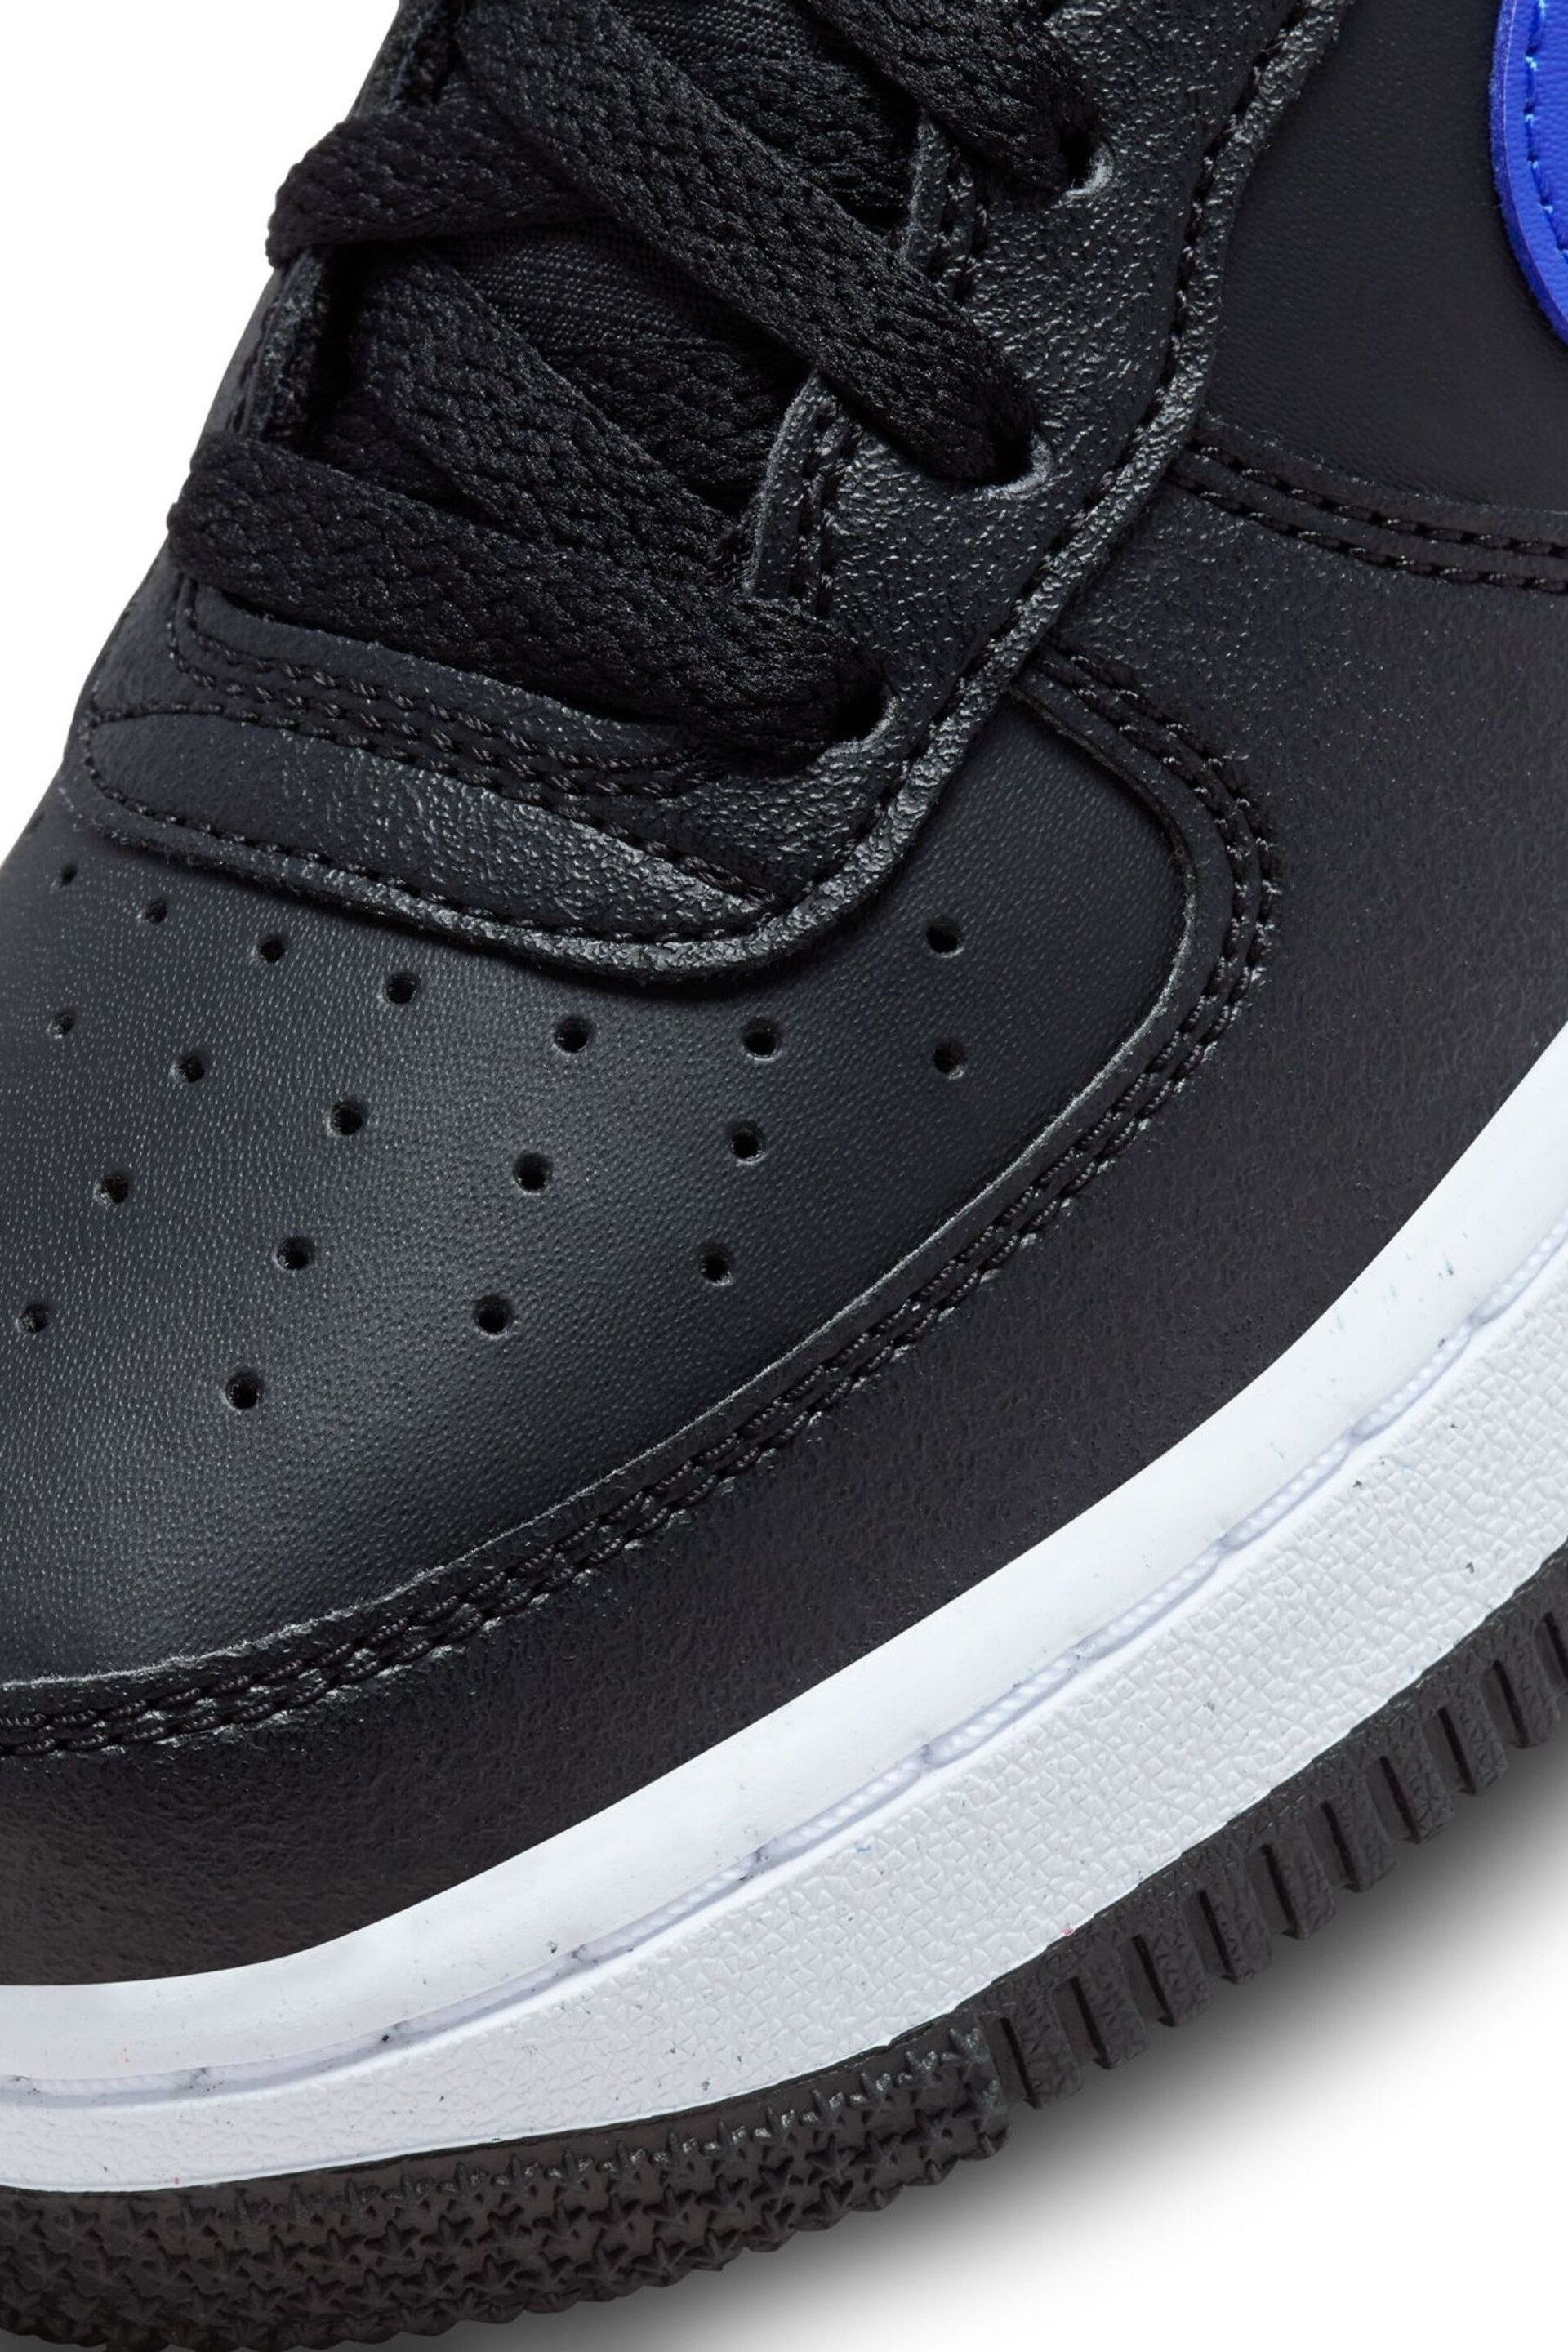 Nike Black/Grey Air Force 1 Next Nature Youth Trainers - Image 6 of 9